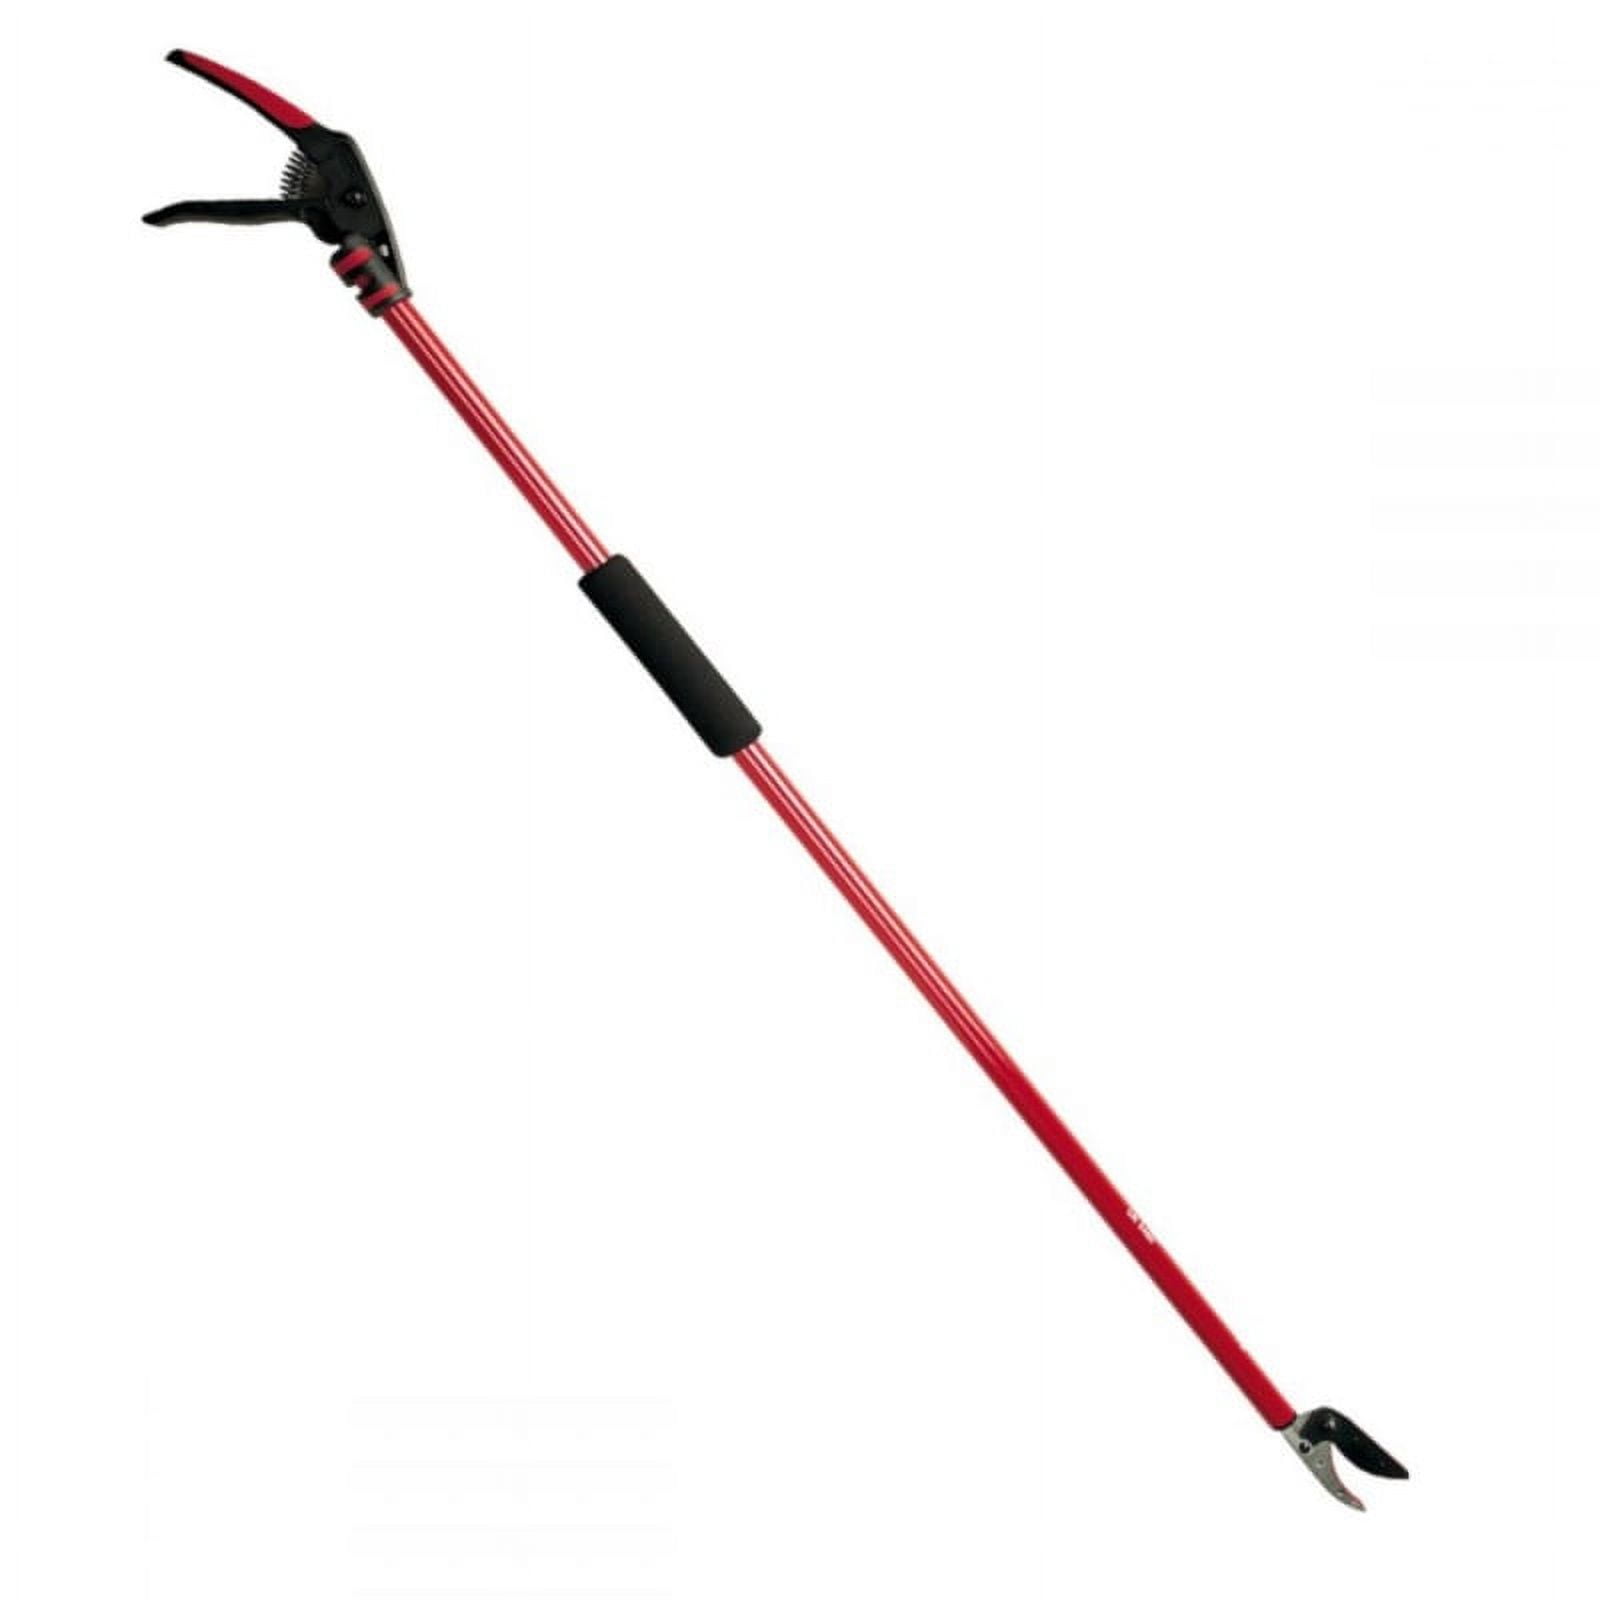 Argos Product Support for Black + Decker Corded Alligator Lopper - 550W  (933/5336)